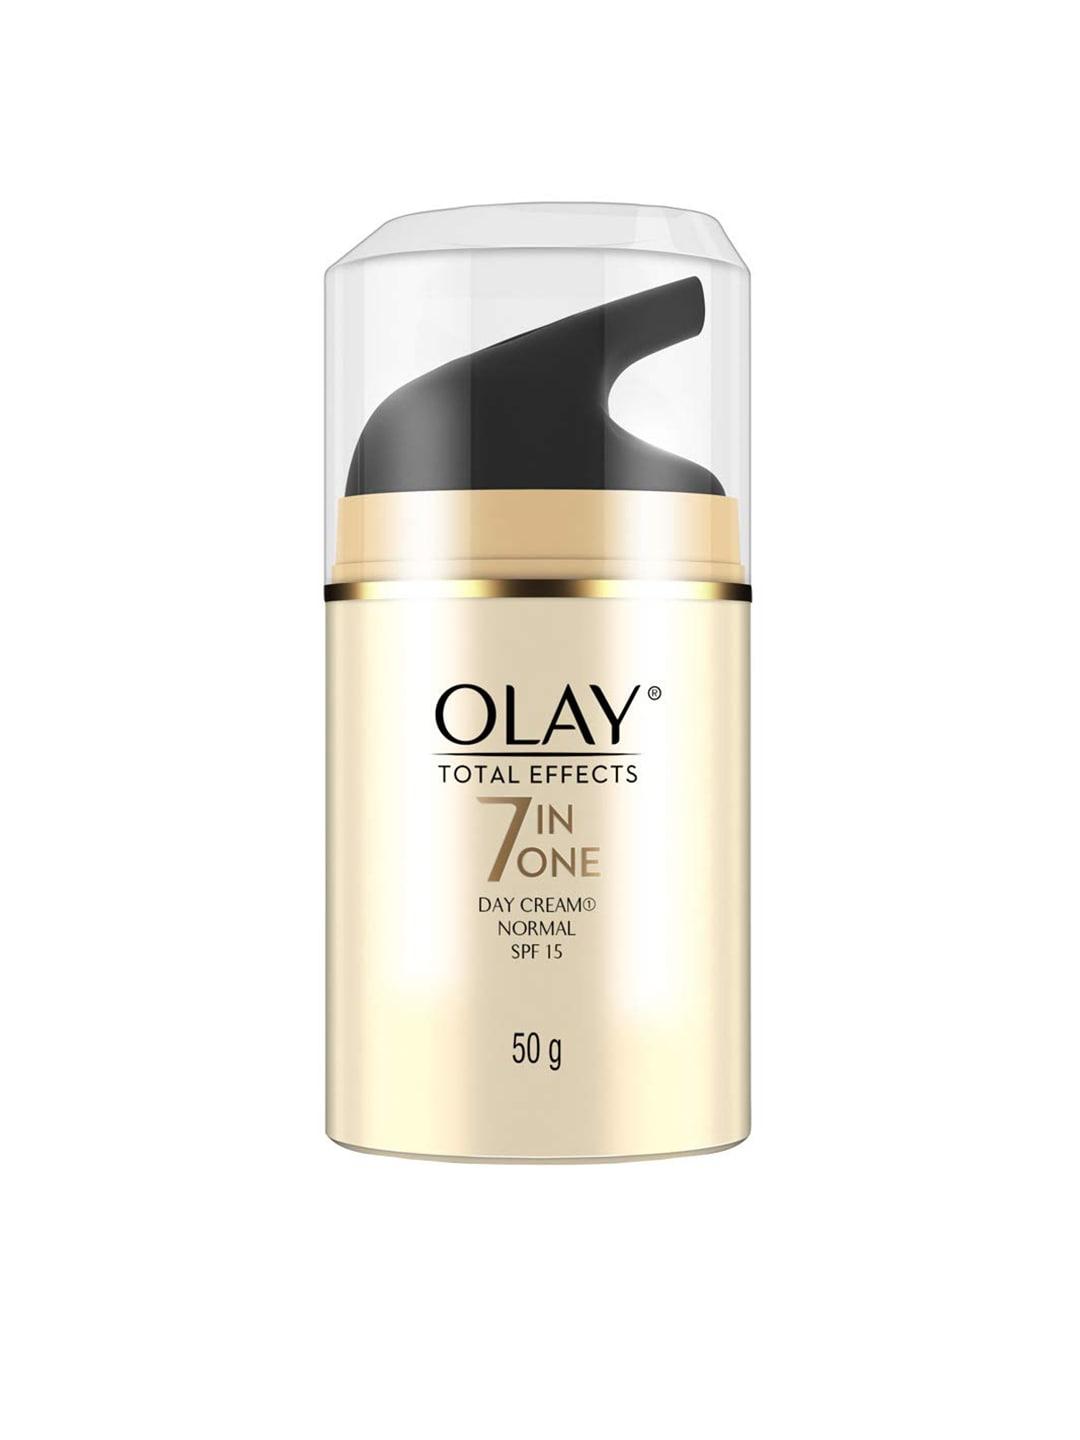 Olay Total Effects 7 In One Anti-Ageing Day Cream SPF 15 50g